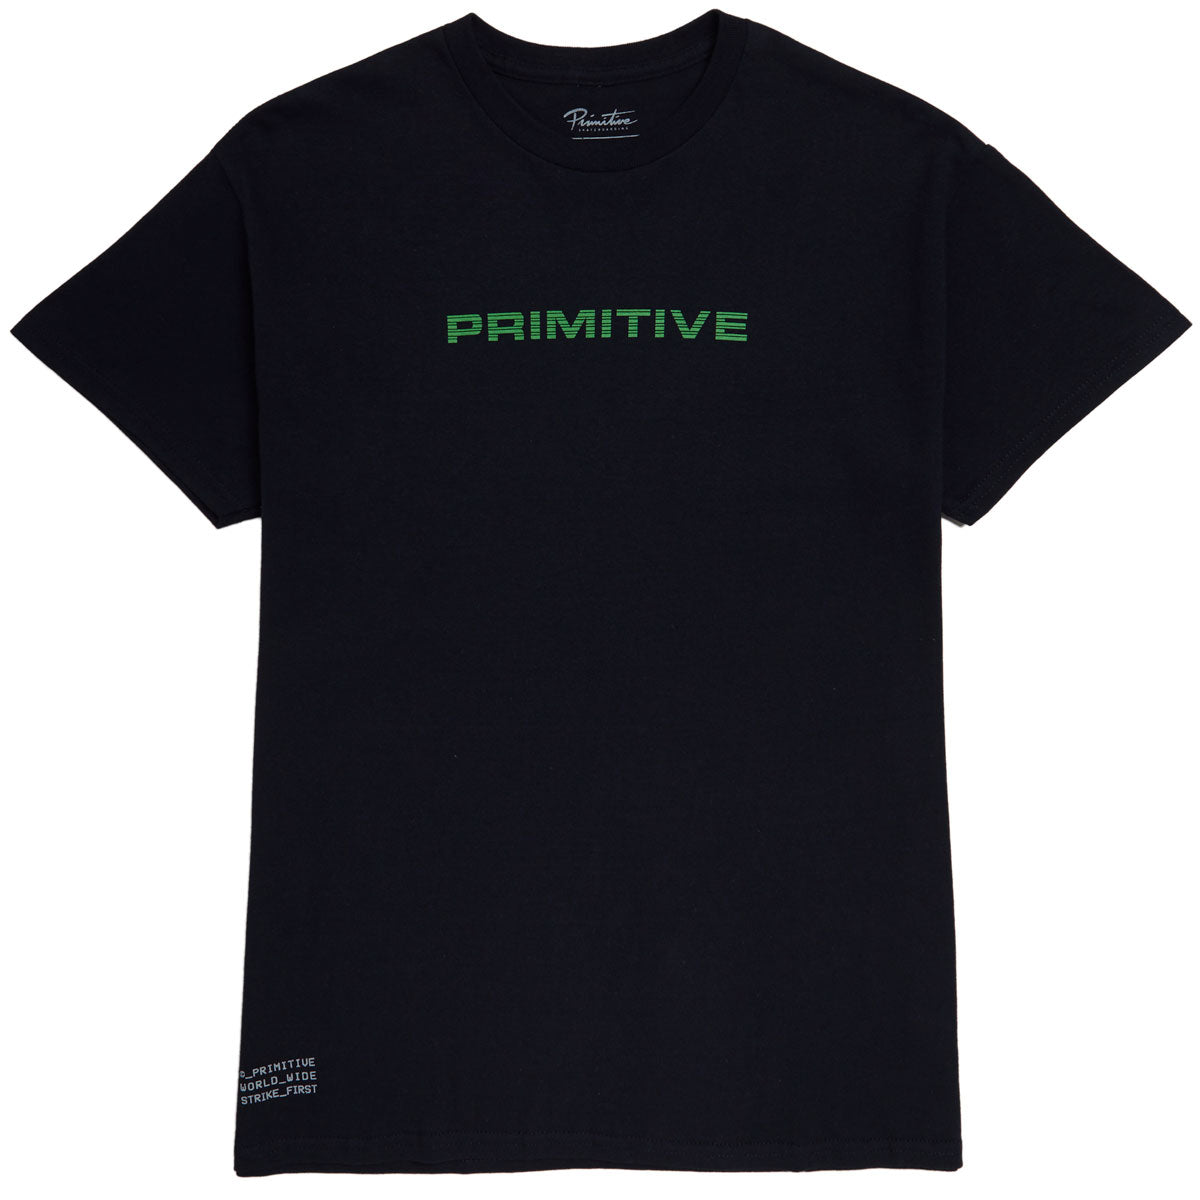 Primitive x Call Of Duty Ghost T-Shirt - Black image 3